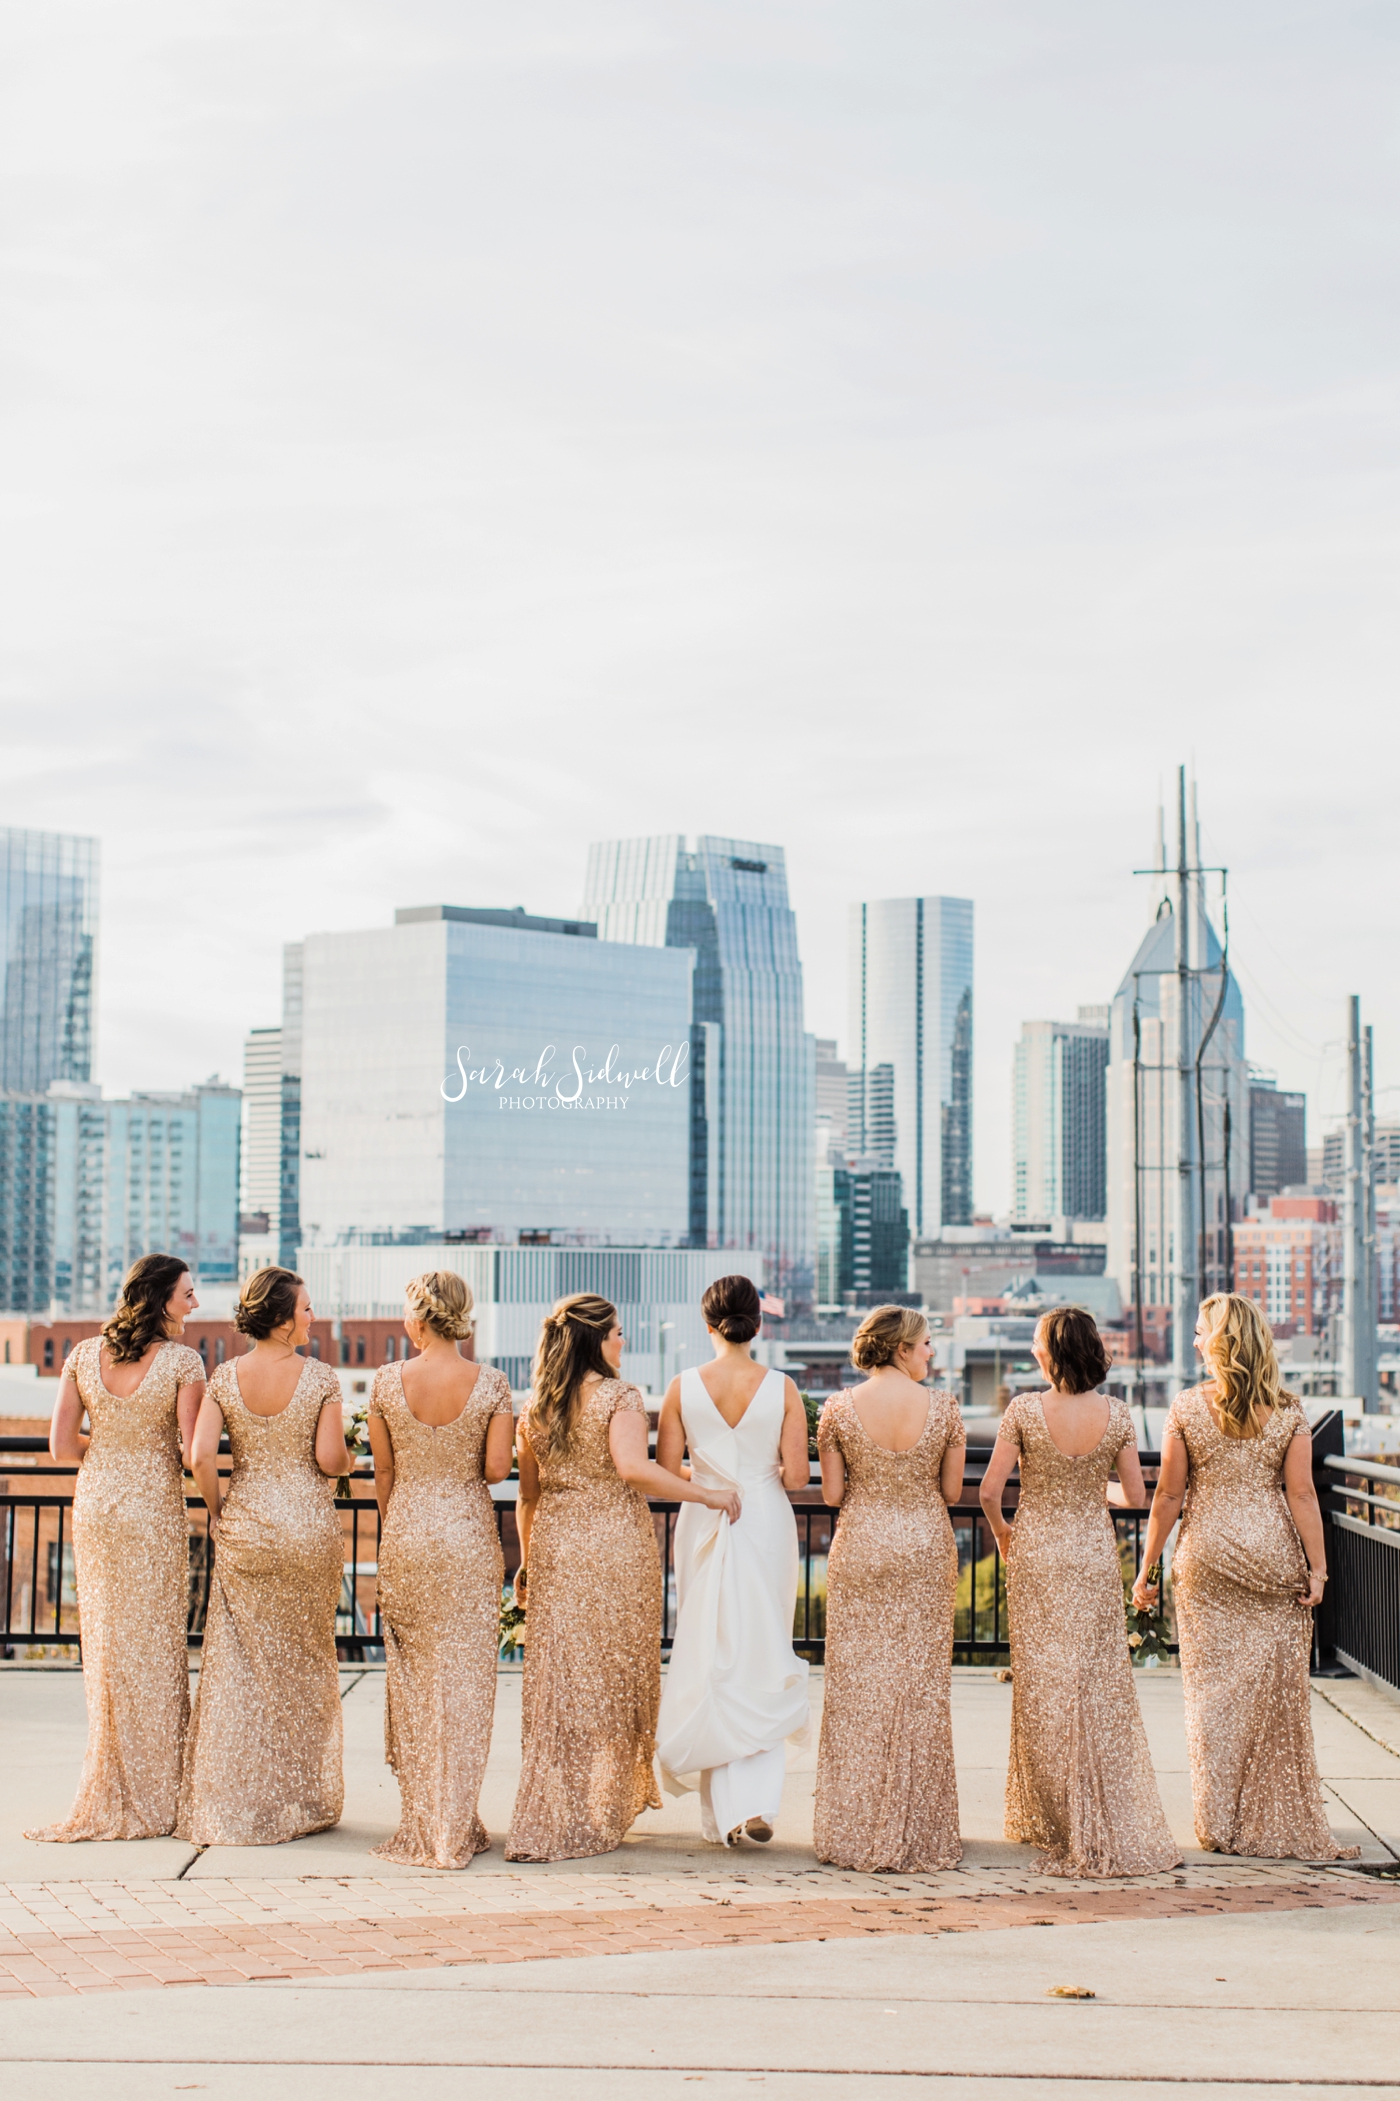 A bridal party shows off their dresses | Sarah Sidwell Photography | The Bell Tower